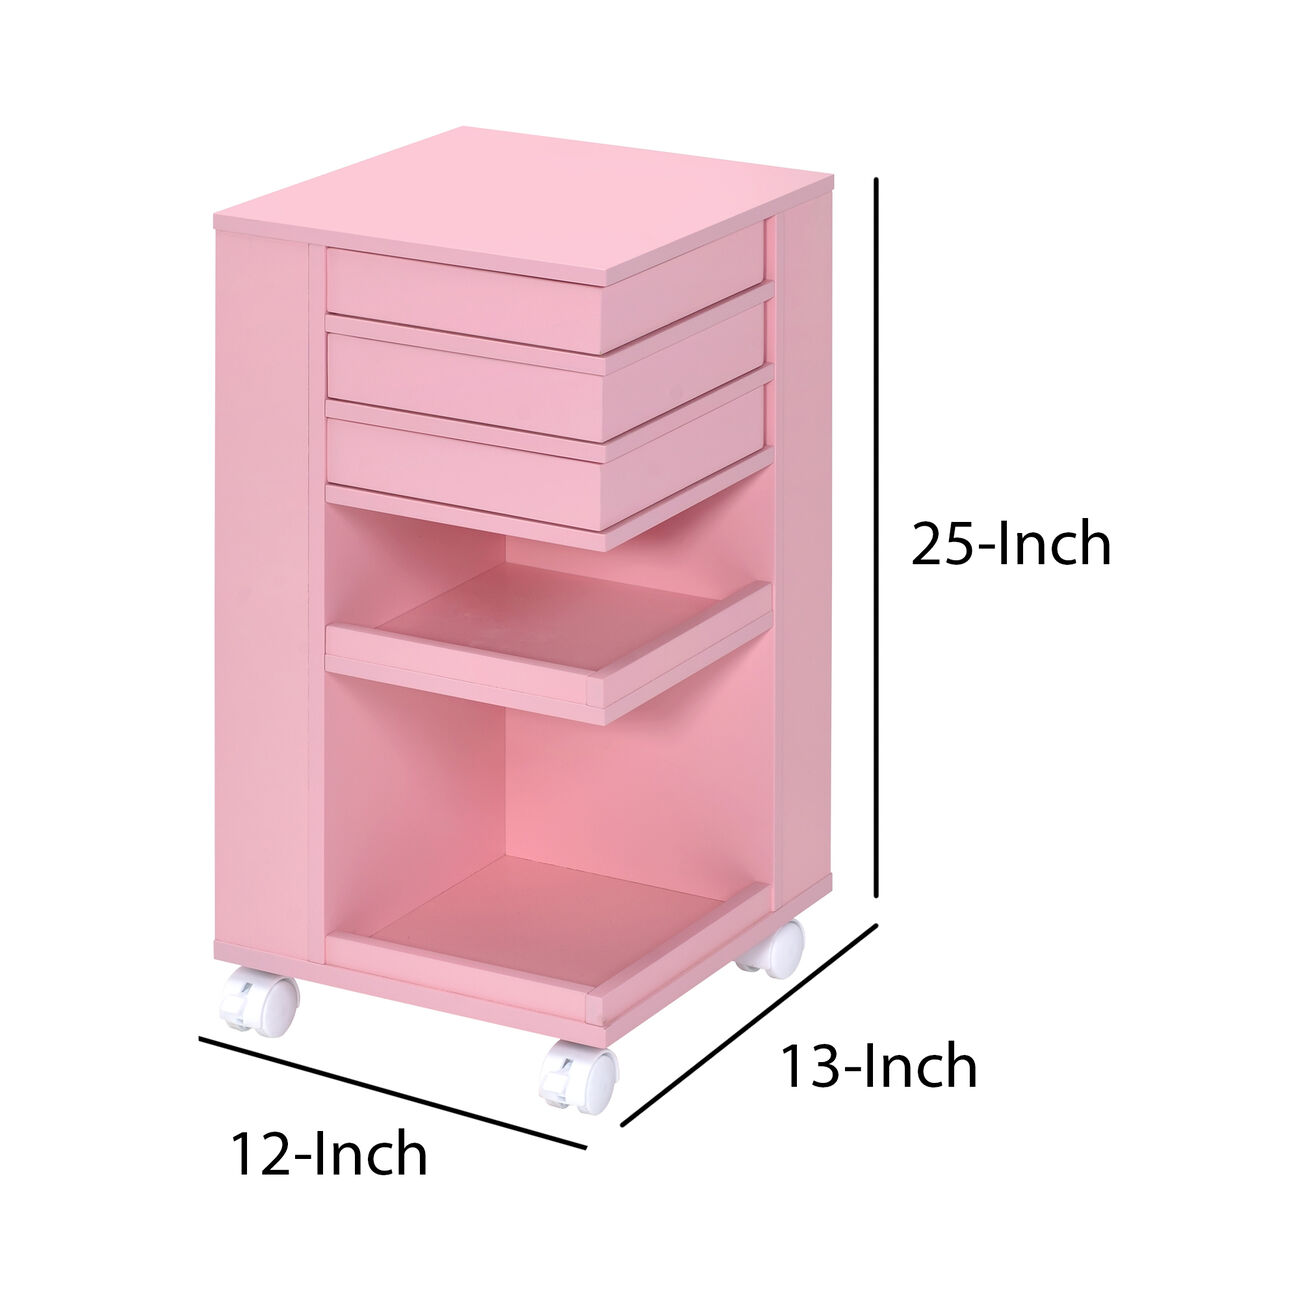 Wooden Storage Cart with 3 Drawers and 2 Open Shelves, Pink